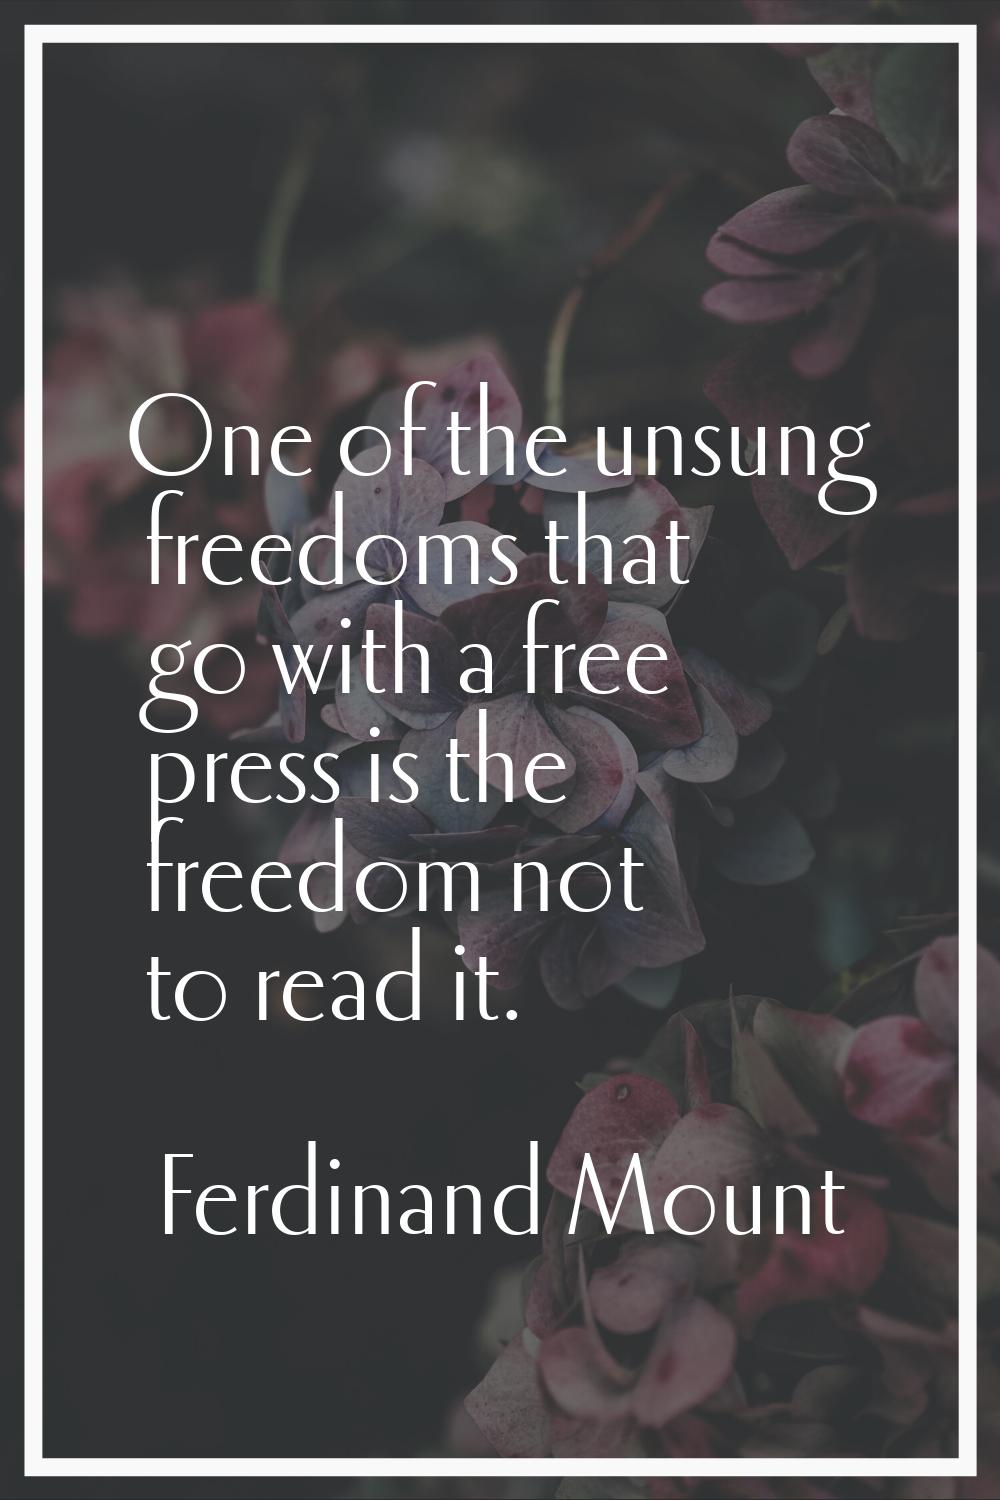 One of the unsung freedoms that go with a free press is the freedom not to read it.